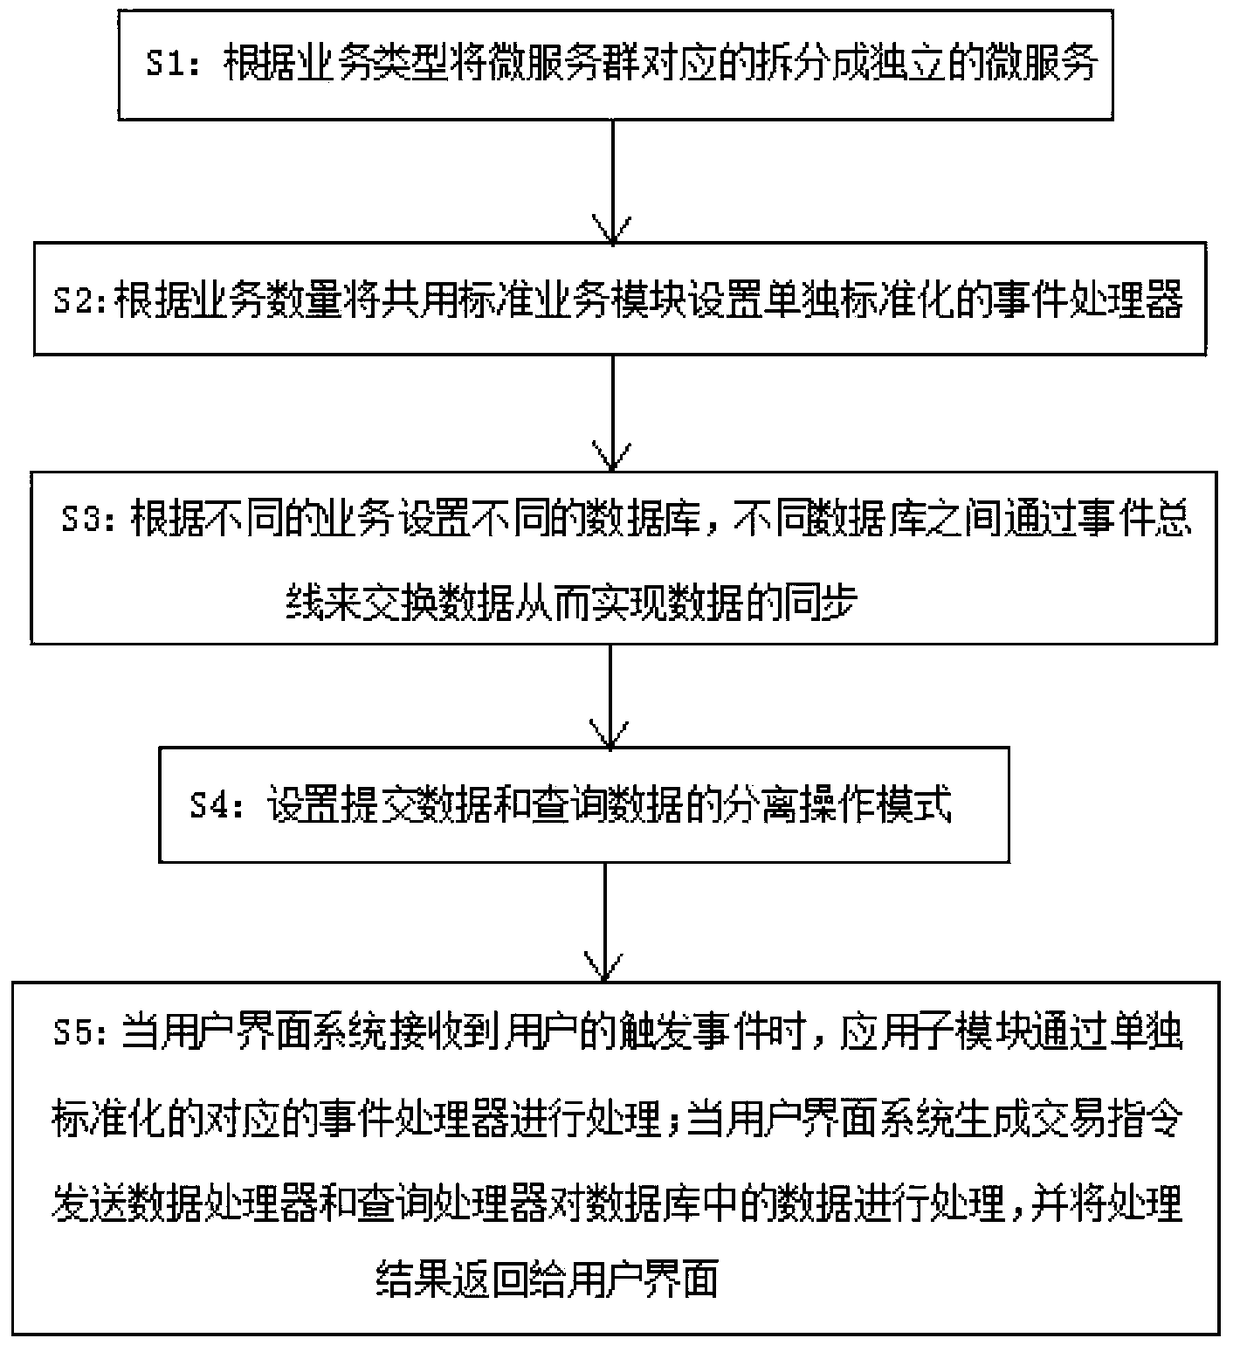 Multi-mode transaction implementation system and method based on micro-service architecture